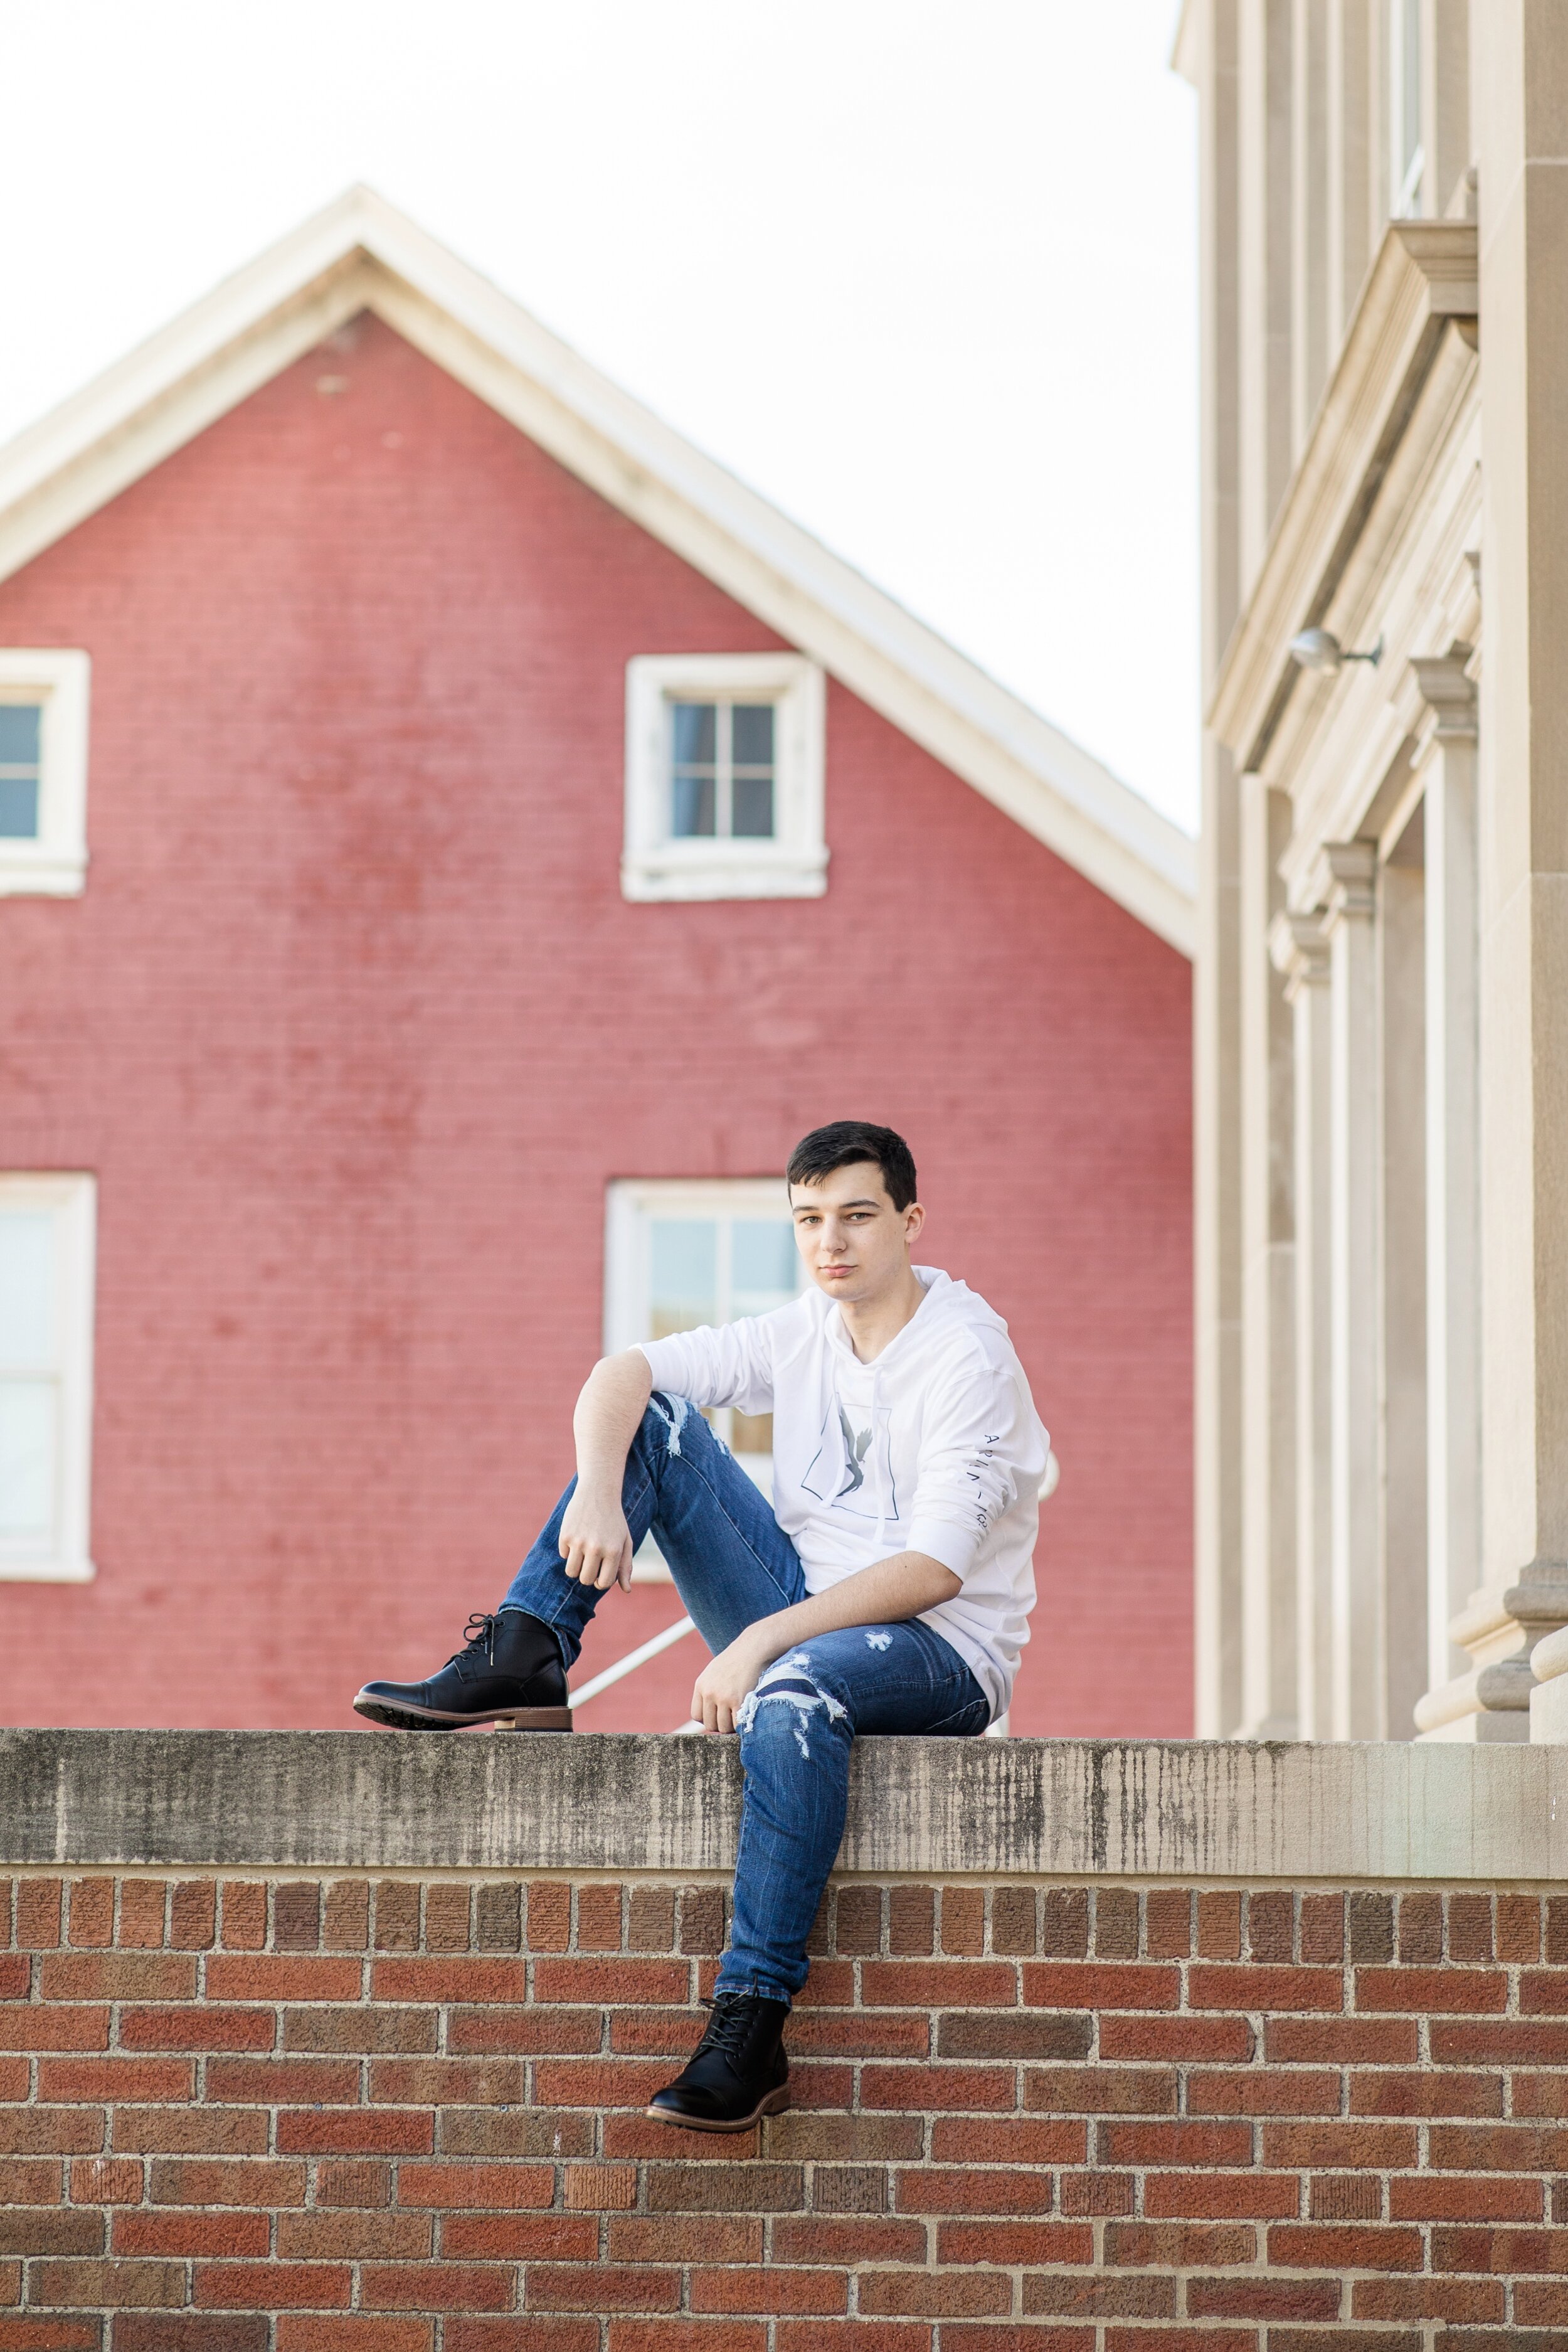 historic harmony senior pictures, locations for senior photos pittsburgh, pittsburgh senior photographer, cranberry township senior photographer